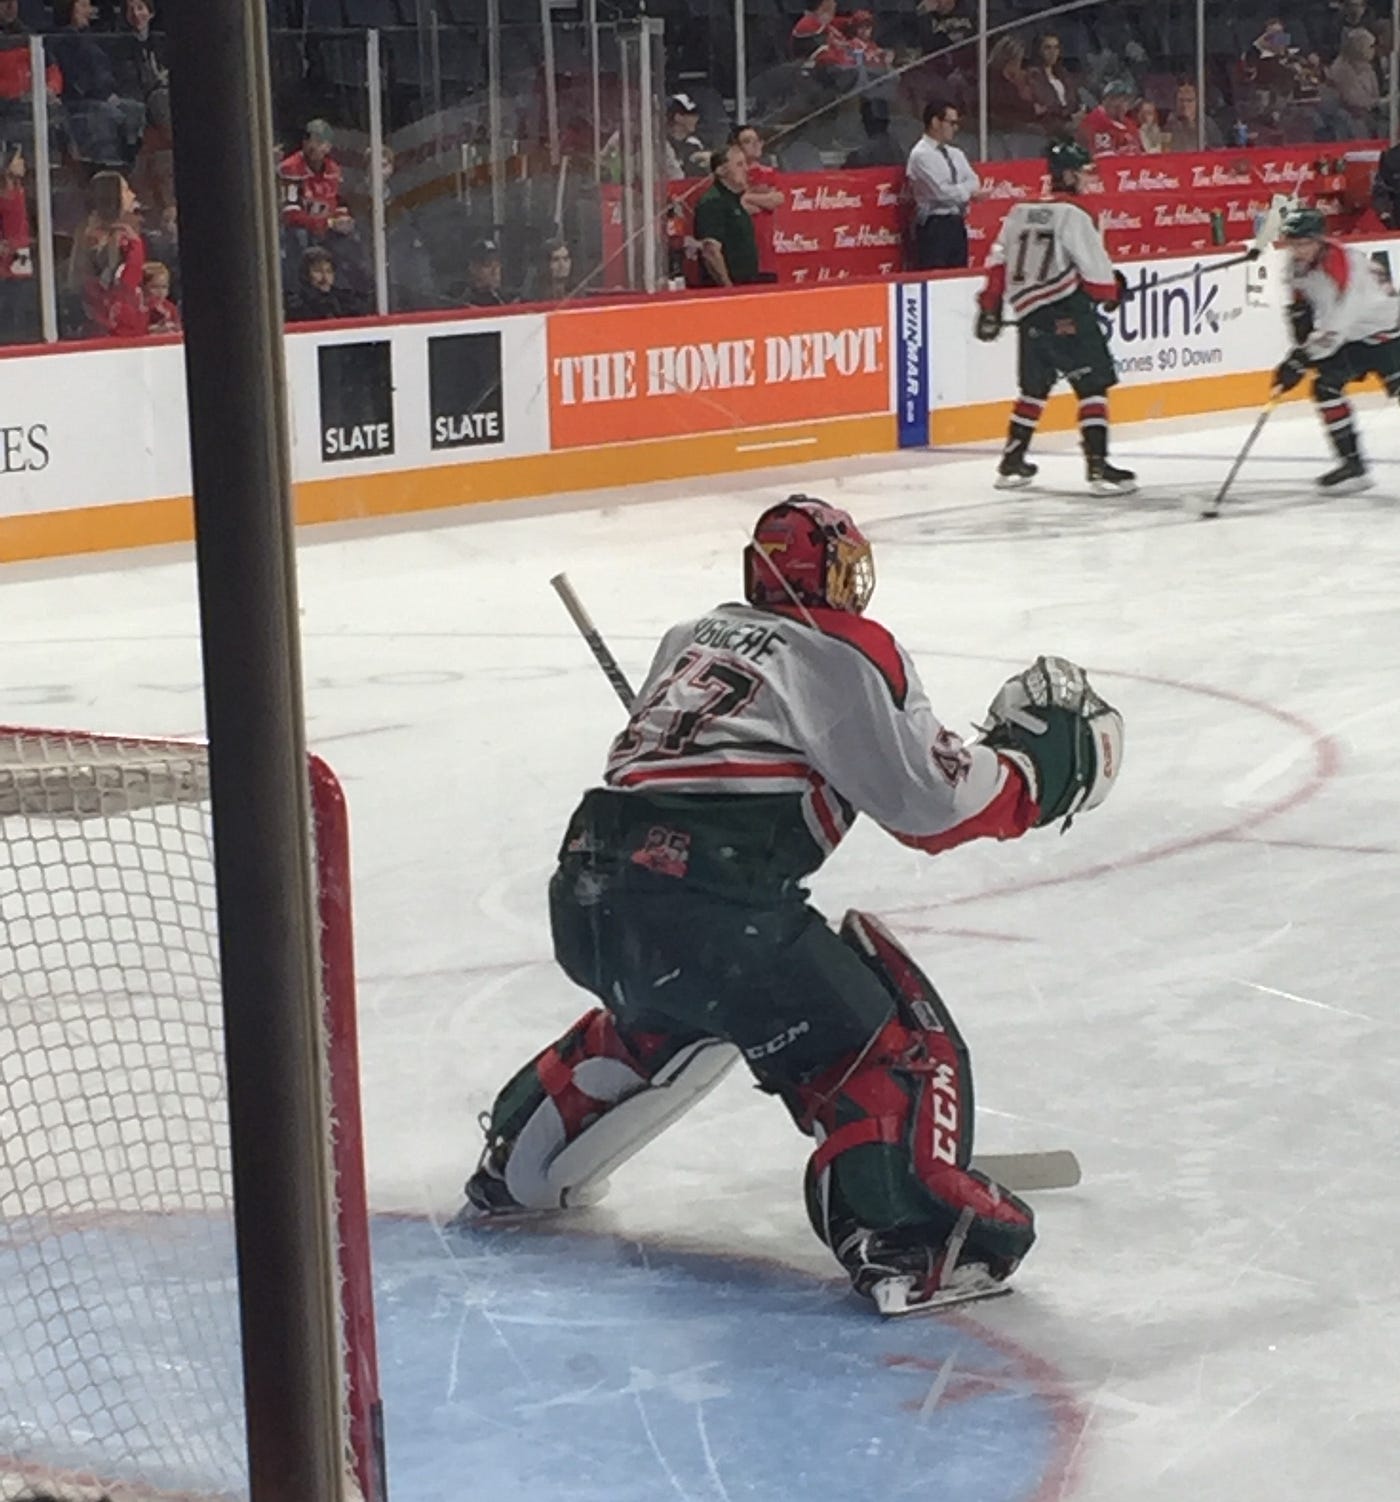 MAY 19TH JERSEY-A-DAY WINNER - Halifax Mooseheads